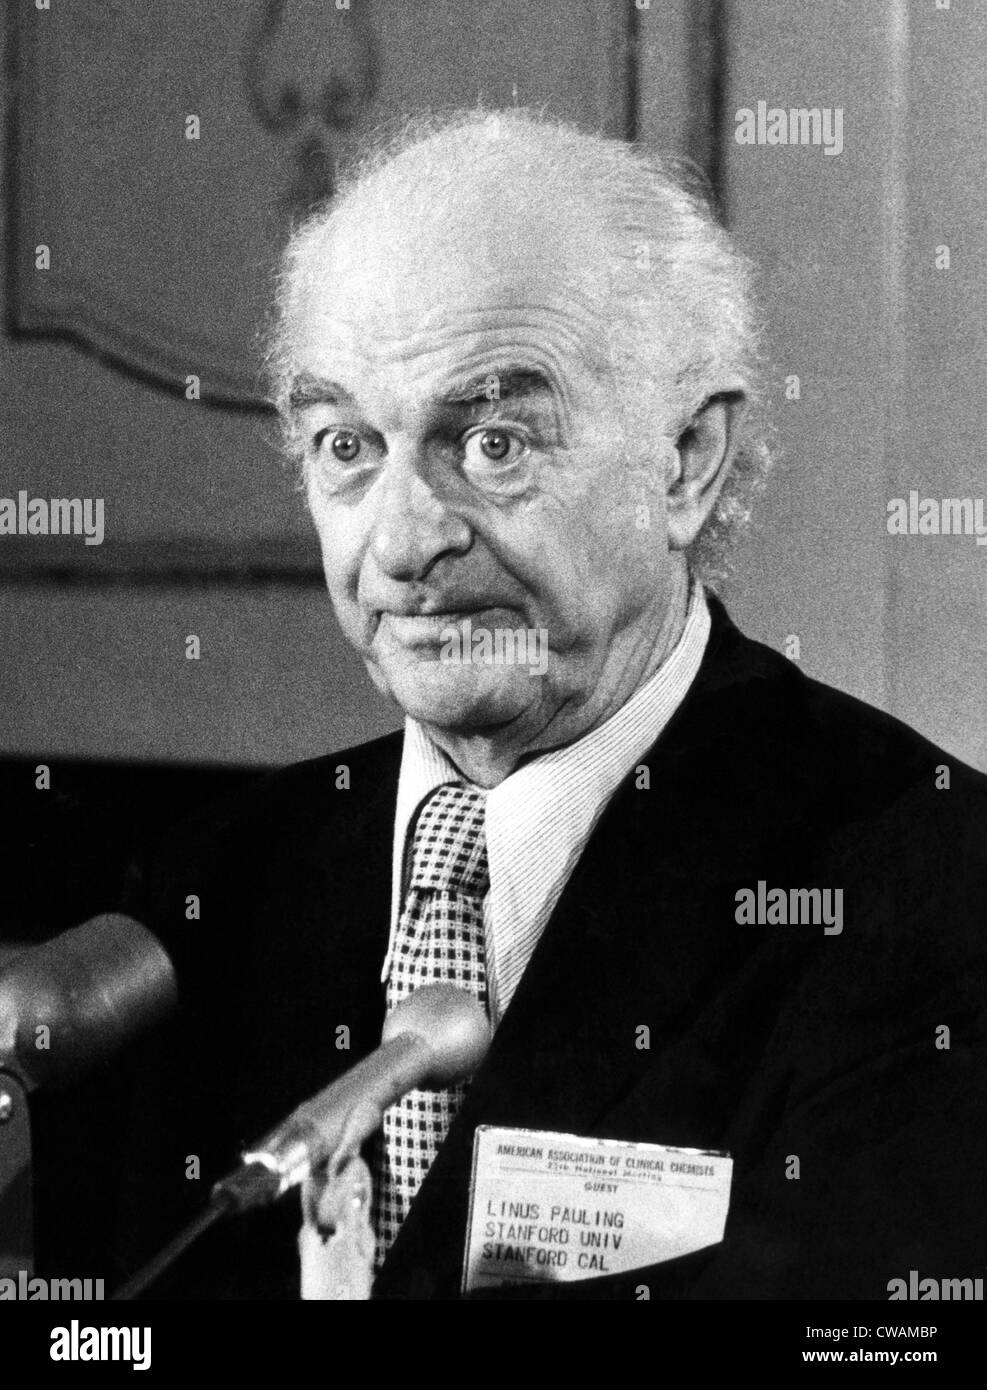 Chemist and Nobel Prize winner Linus Pauling, (1901-1944), at a meeting with the American Association of Clinical Chemists, New Stock Photo